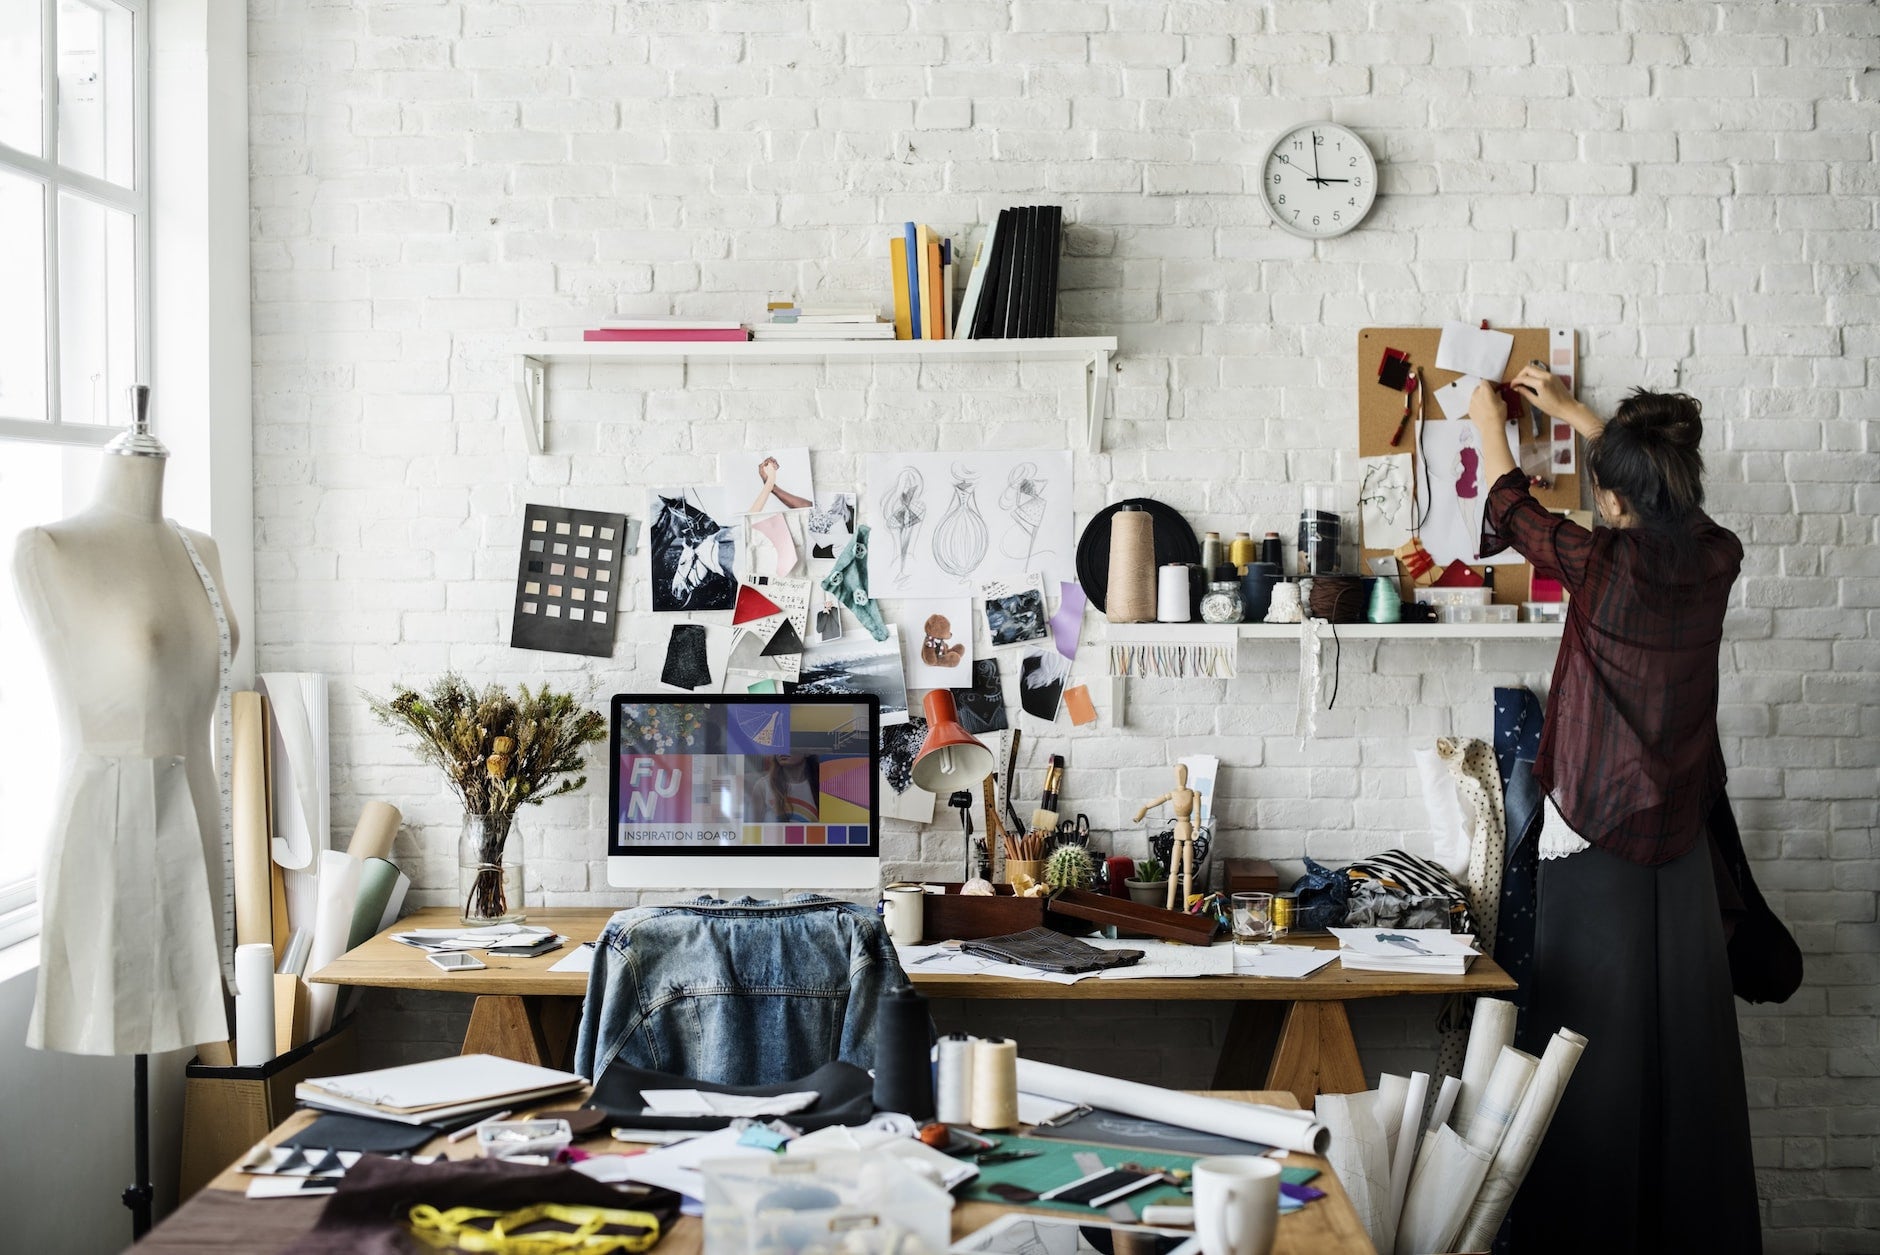 Why “Messy” Workspace Interiors Work